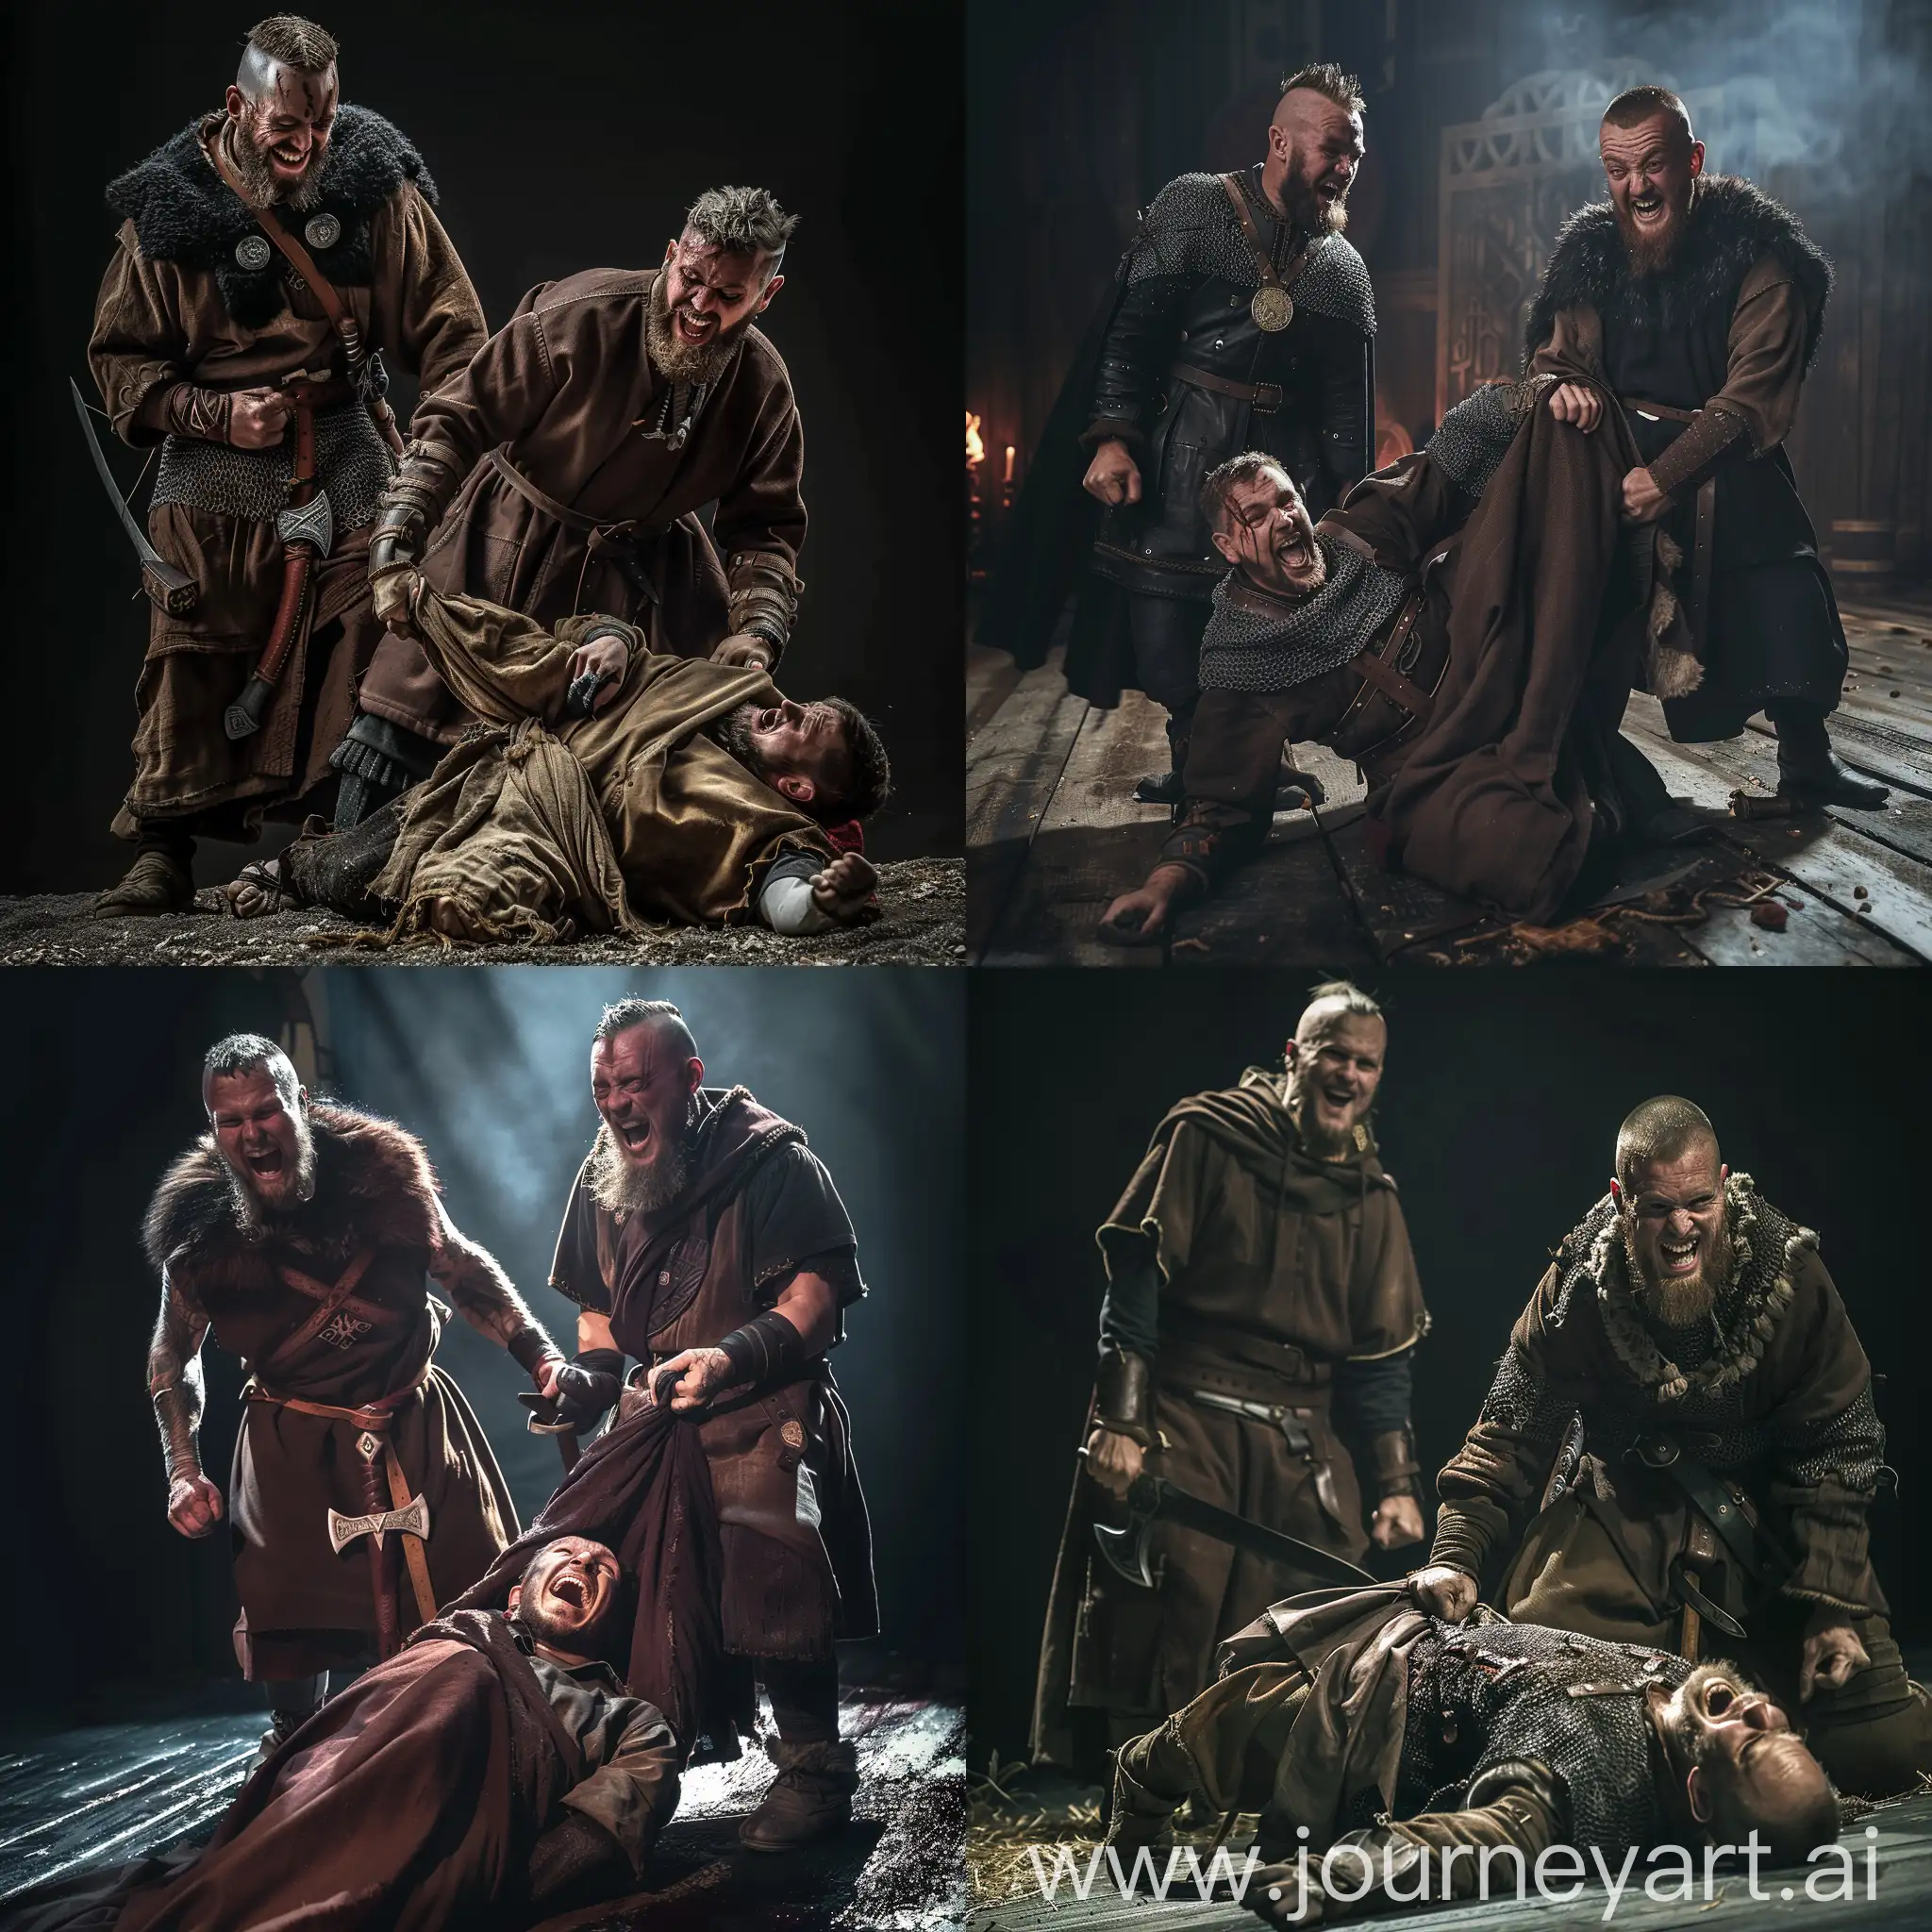 A viking warrior dragging an english monk on the ground by his clothes, there's another viking warrior laughing next to them, cinematic lighting